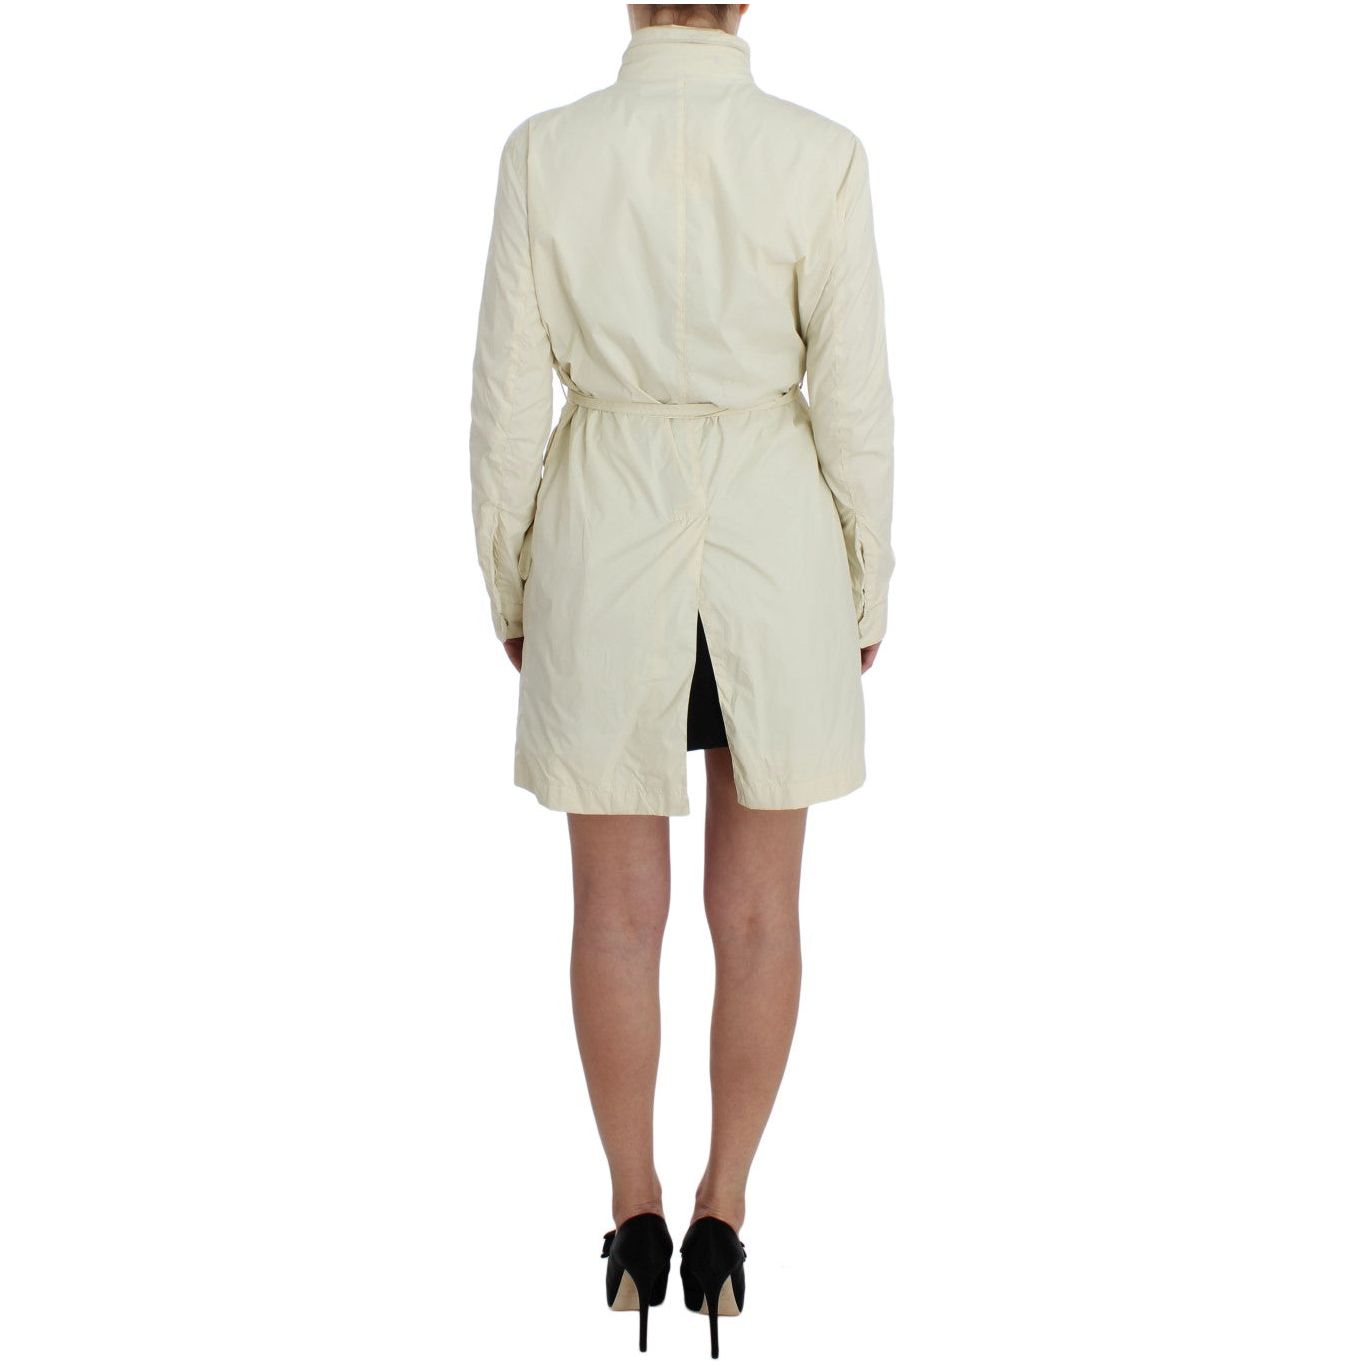 P.A.R.O.S.H. Chic Beige Trench Jacket Coat Coats & Jackets beige-weather-proof-trench-jacket-coat